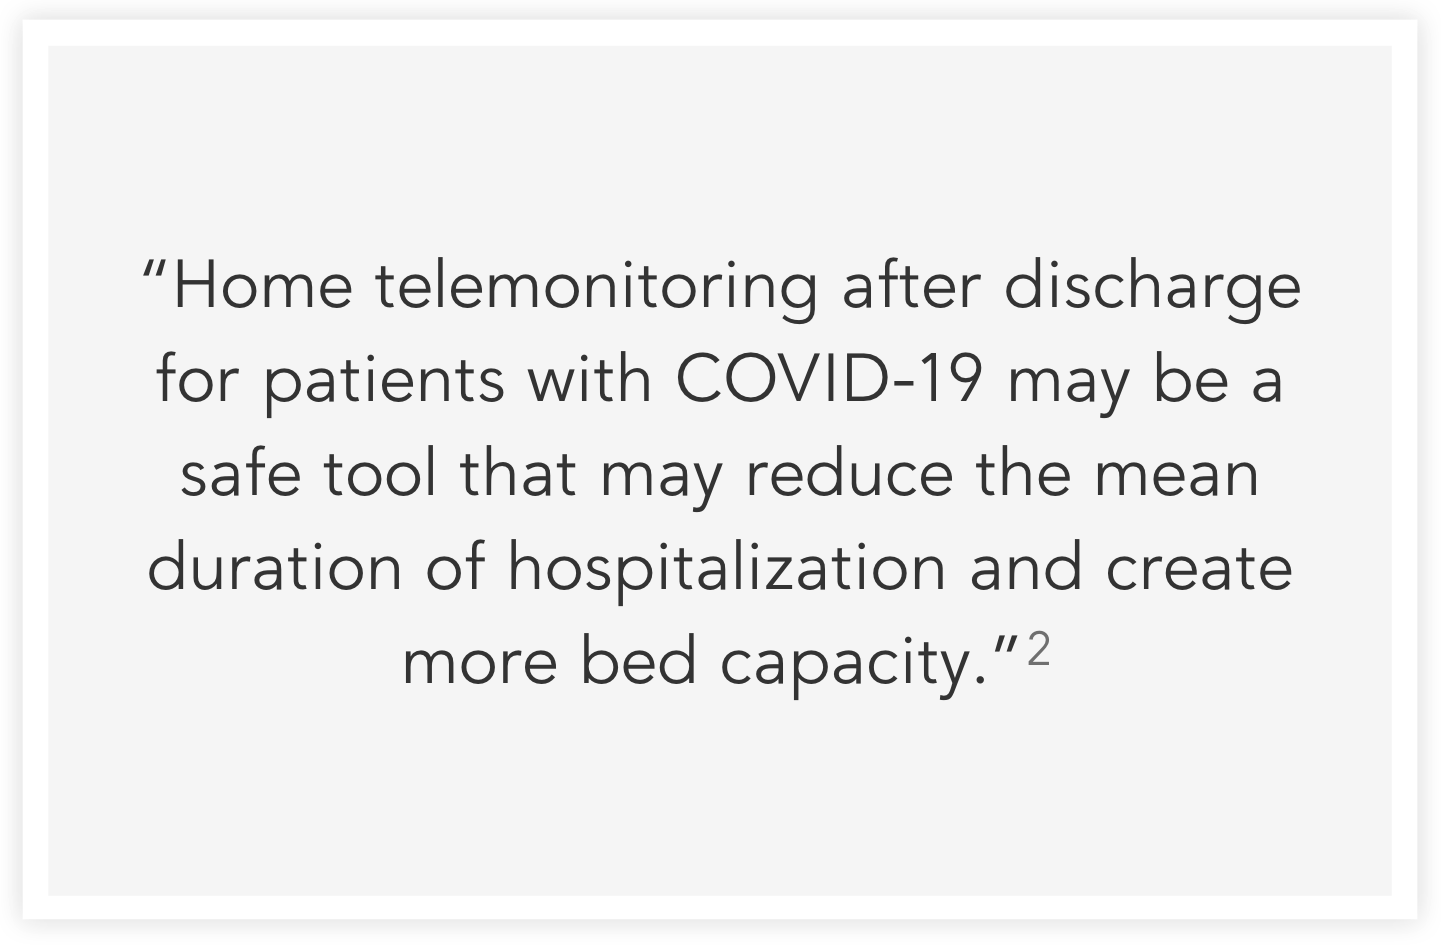 home telemonitoring may be a safe tool to reduce duration of hospitalisation